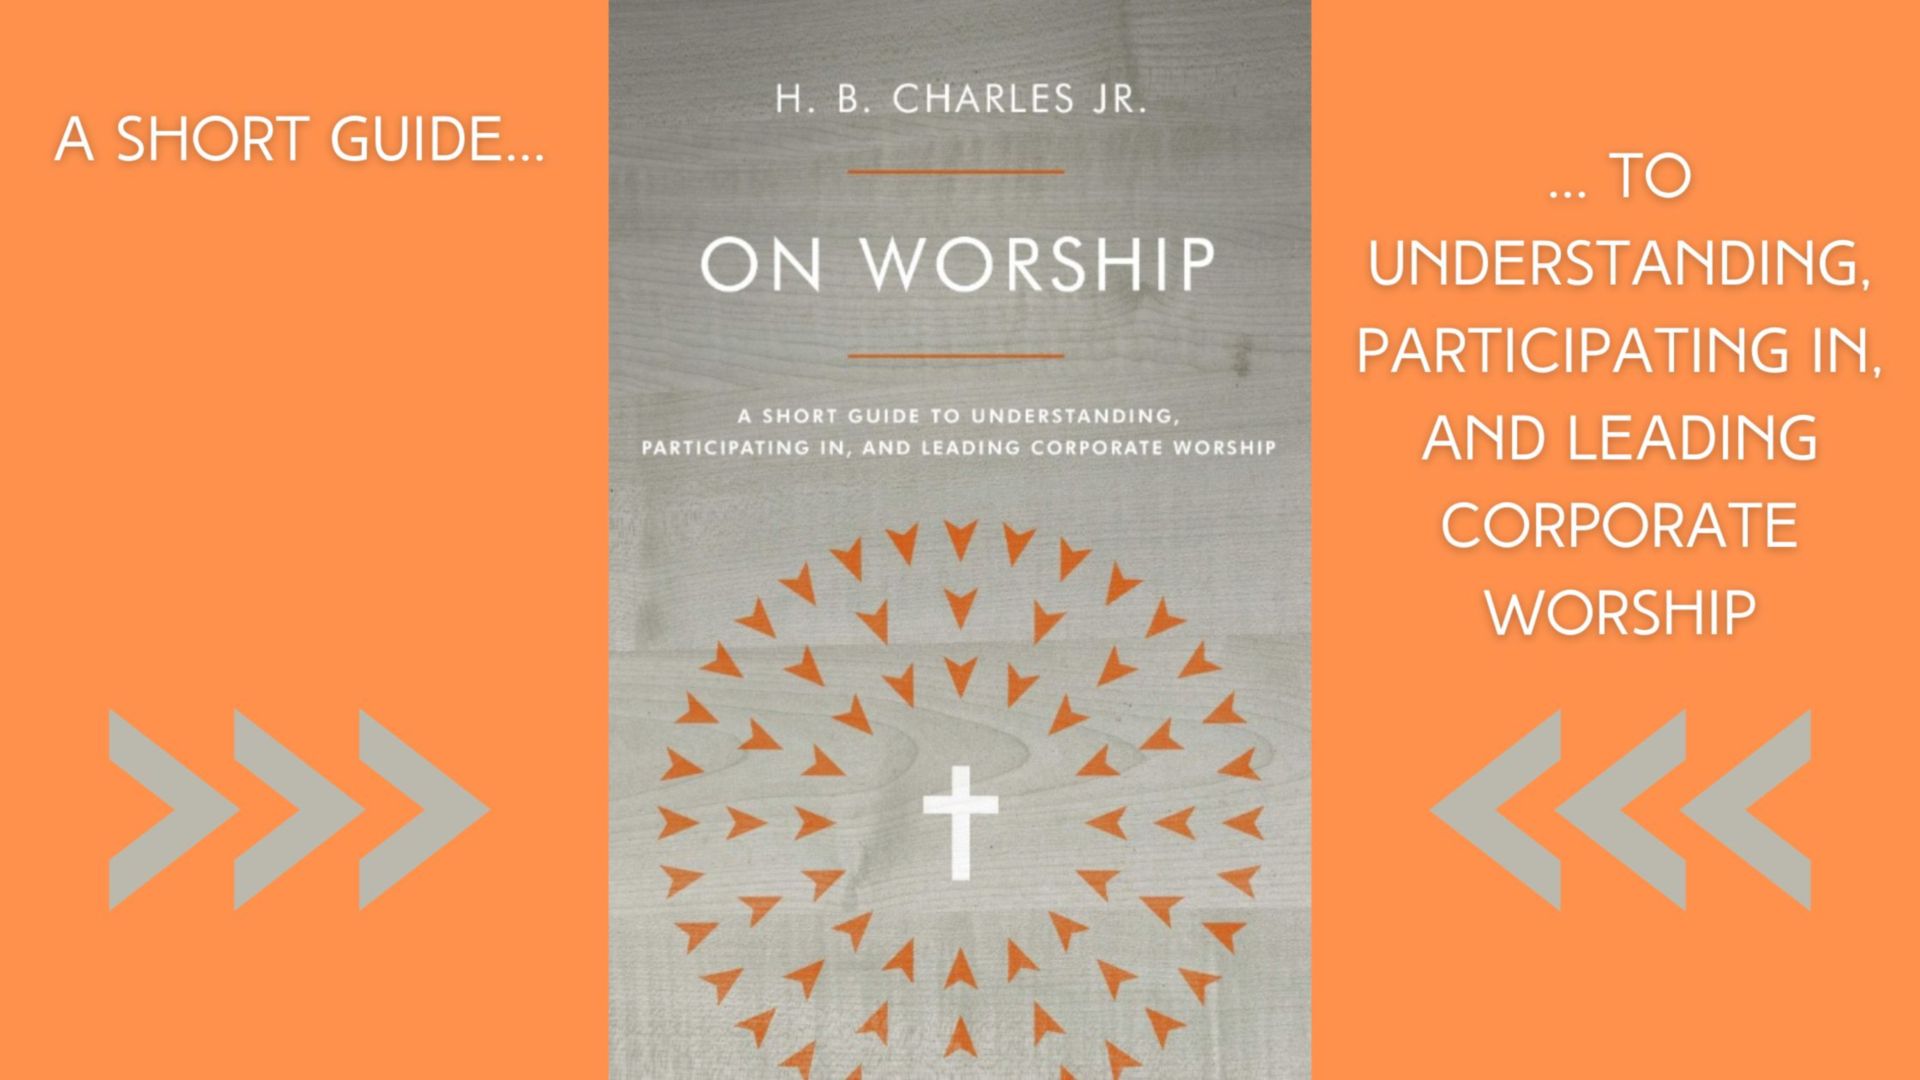 A review of the book 'On Worship' by H. B. Charles Jr.